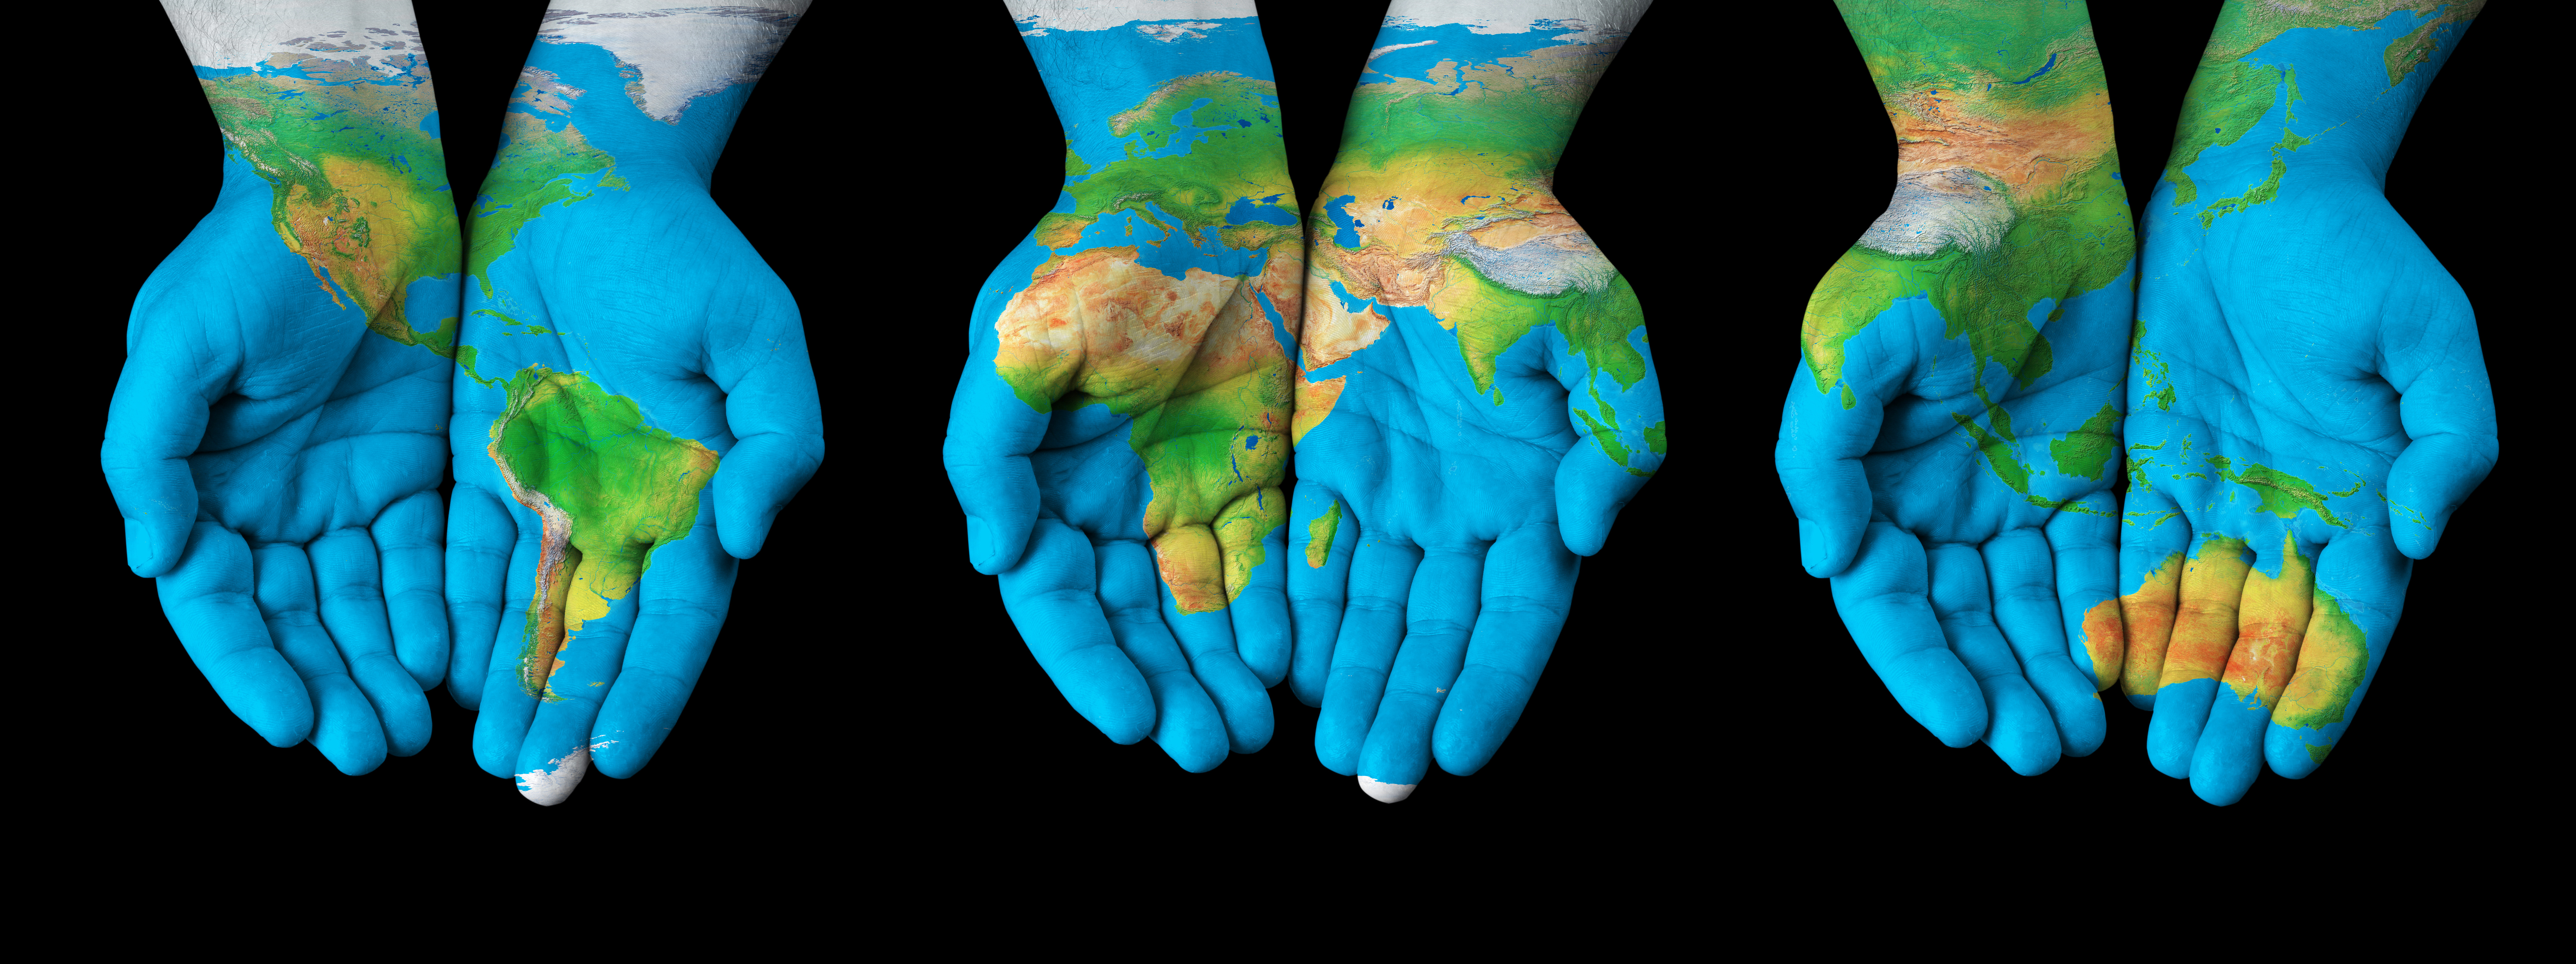 Map painted on hands - concept of having the world in our hands